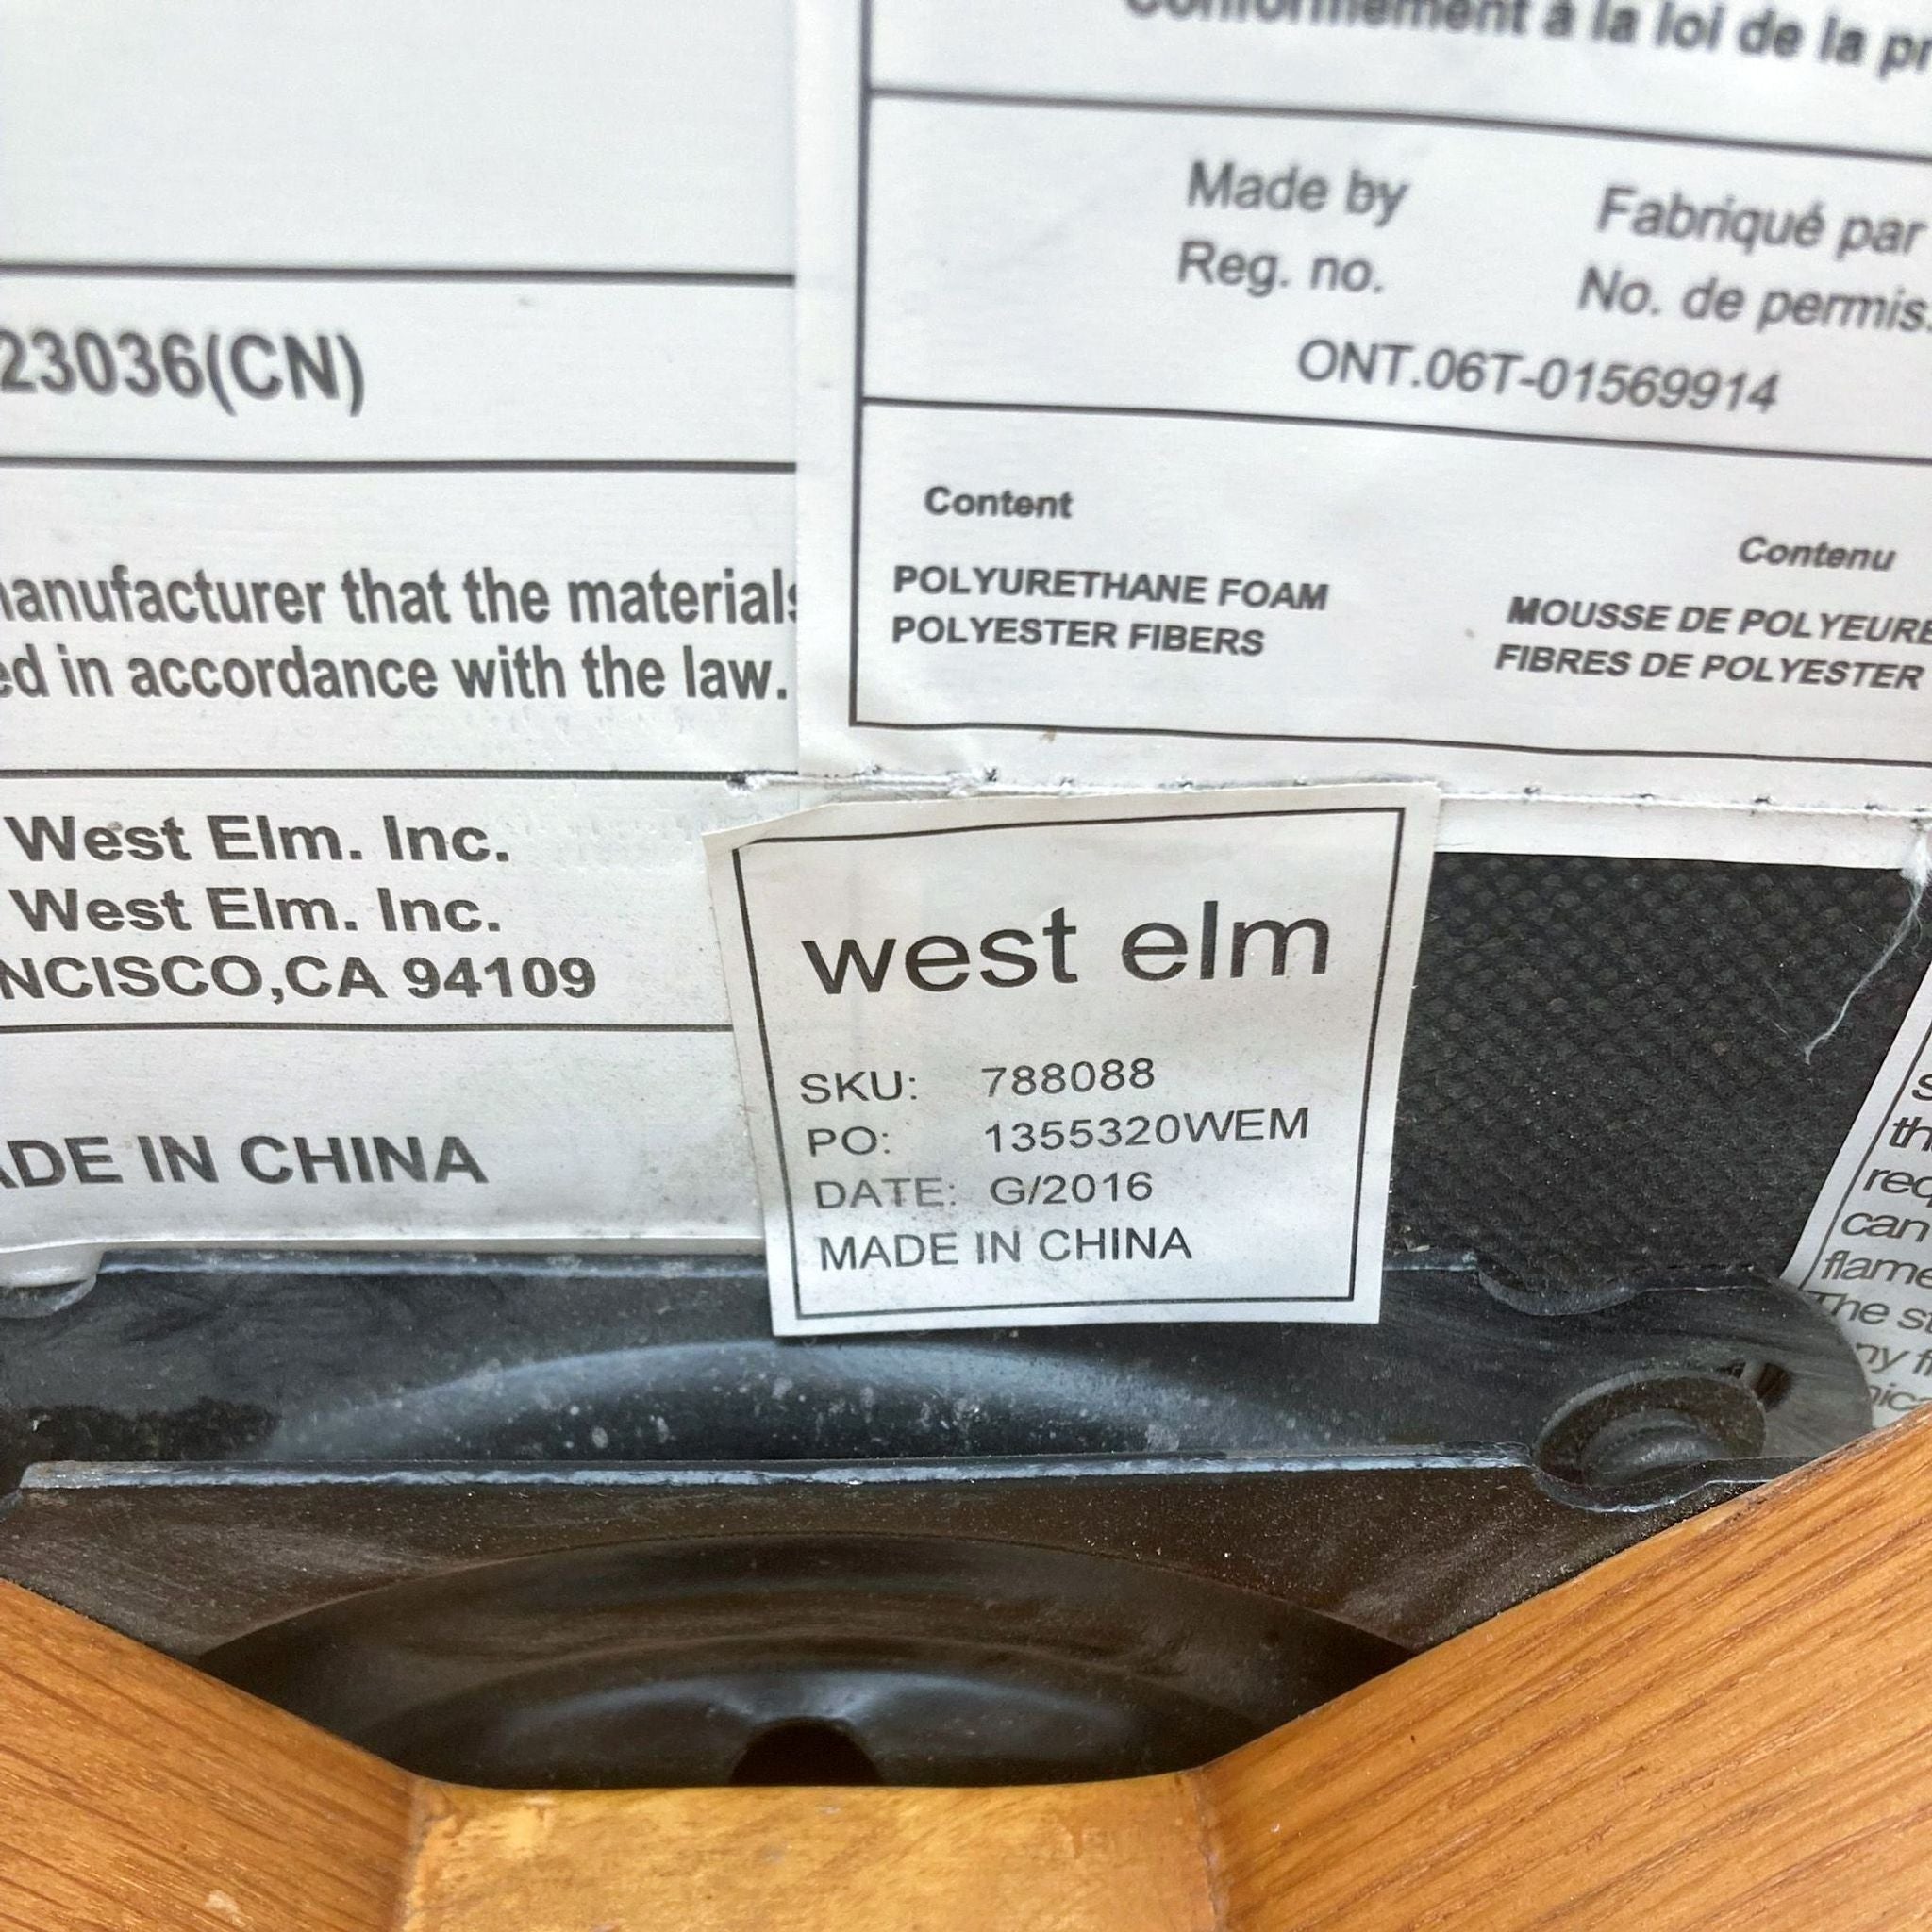 Label on West Elm swivel lounge chair displaying SKU, production details, and materials list.